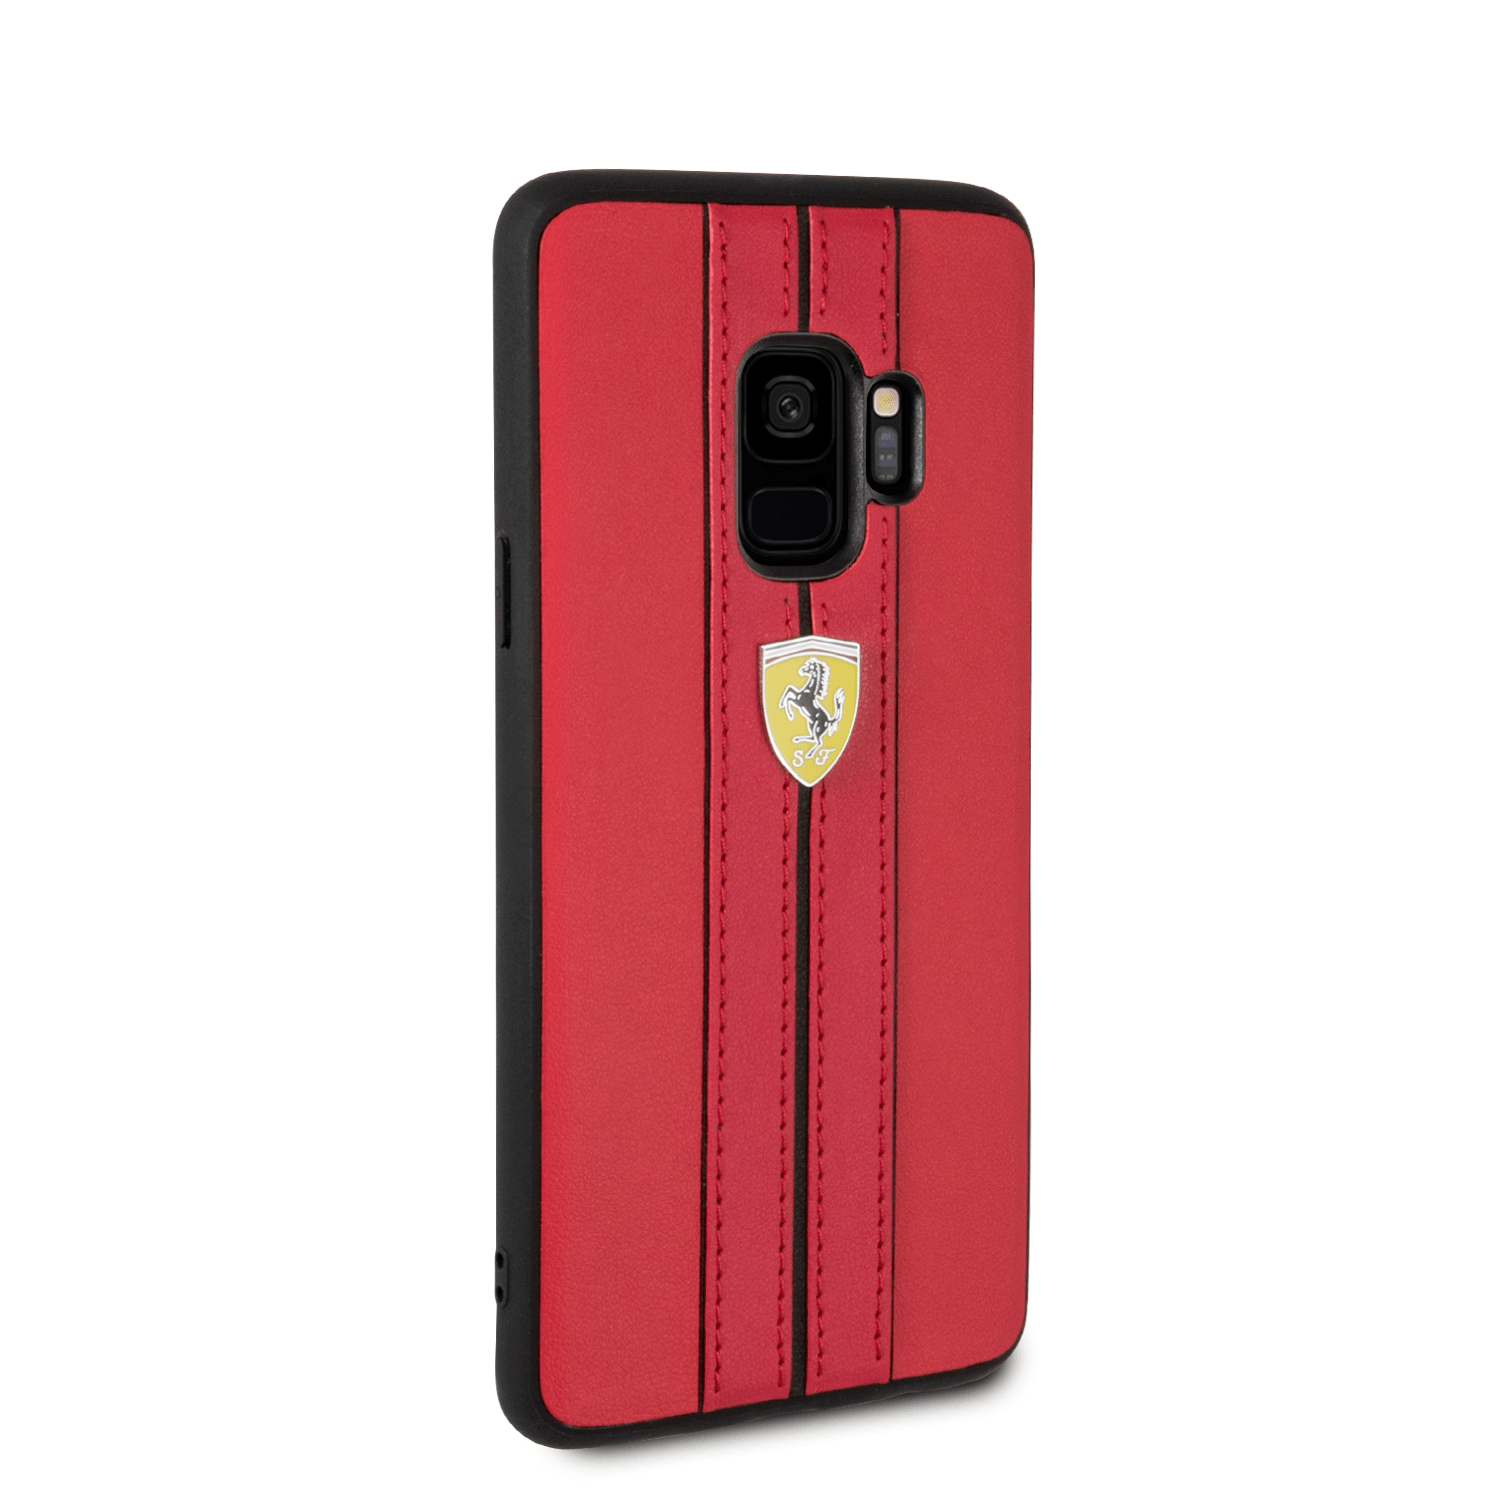 Crafted to provide protection while adding a sophisticated style to your smartphone, featuring contrast piping and shockproof drop protection